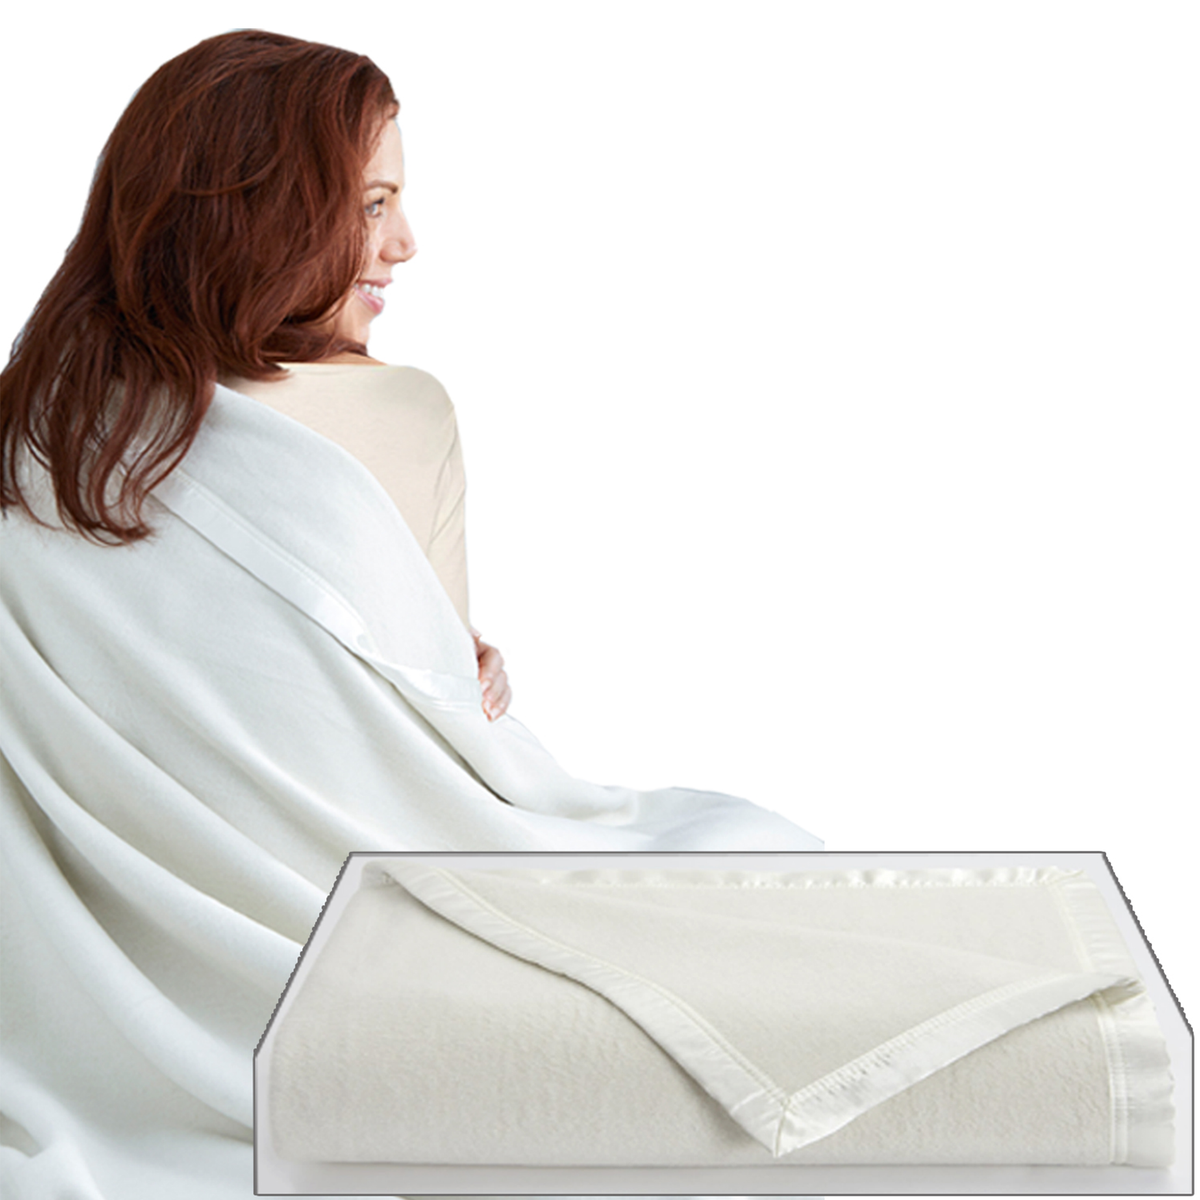 Downtown Company Silk Blankets in Natural Color with Model